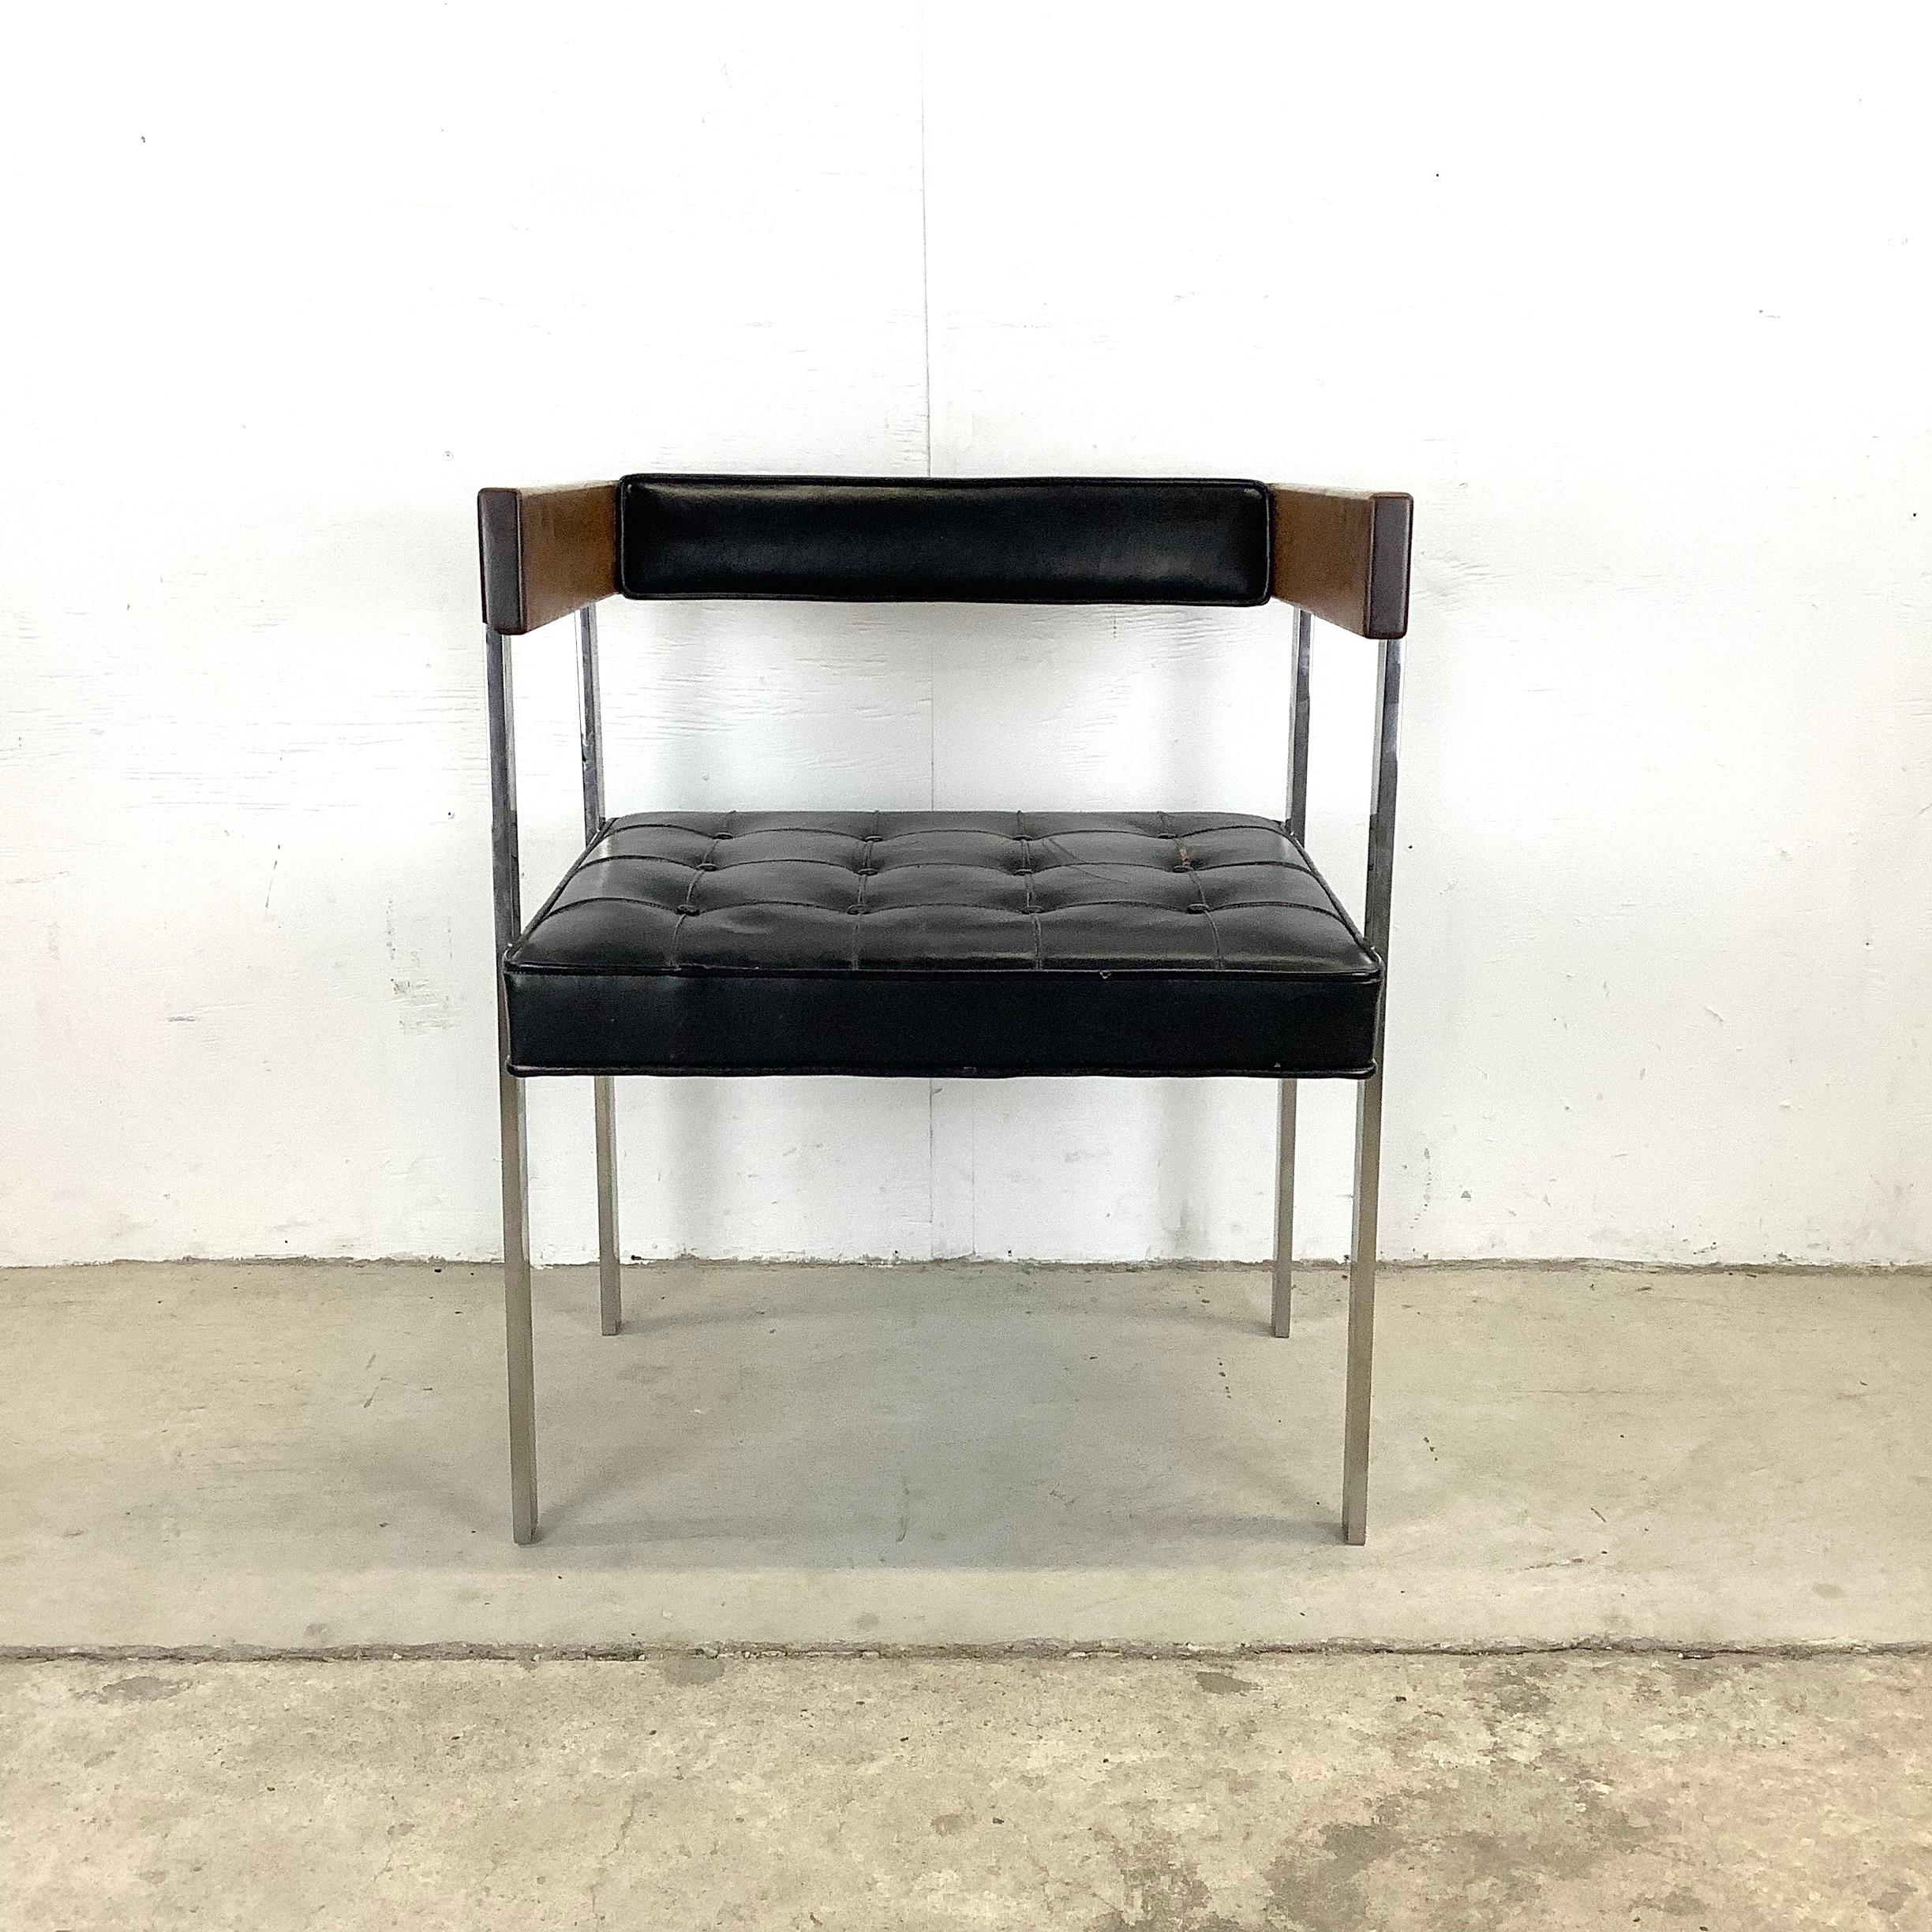 This unique design from the Harvey Probber architectural line is titled Chair 249. The mirrored polish stainless steel legs and solid wood frame add weight to this substantial mid-century armchair. The cube like seat back is accented by the dark